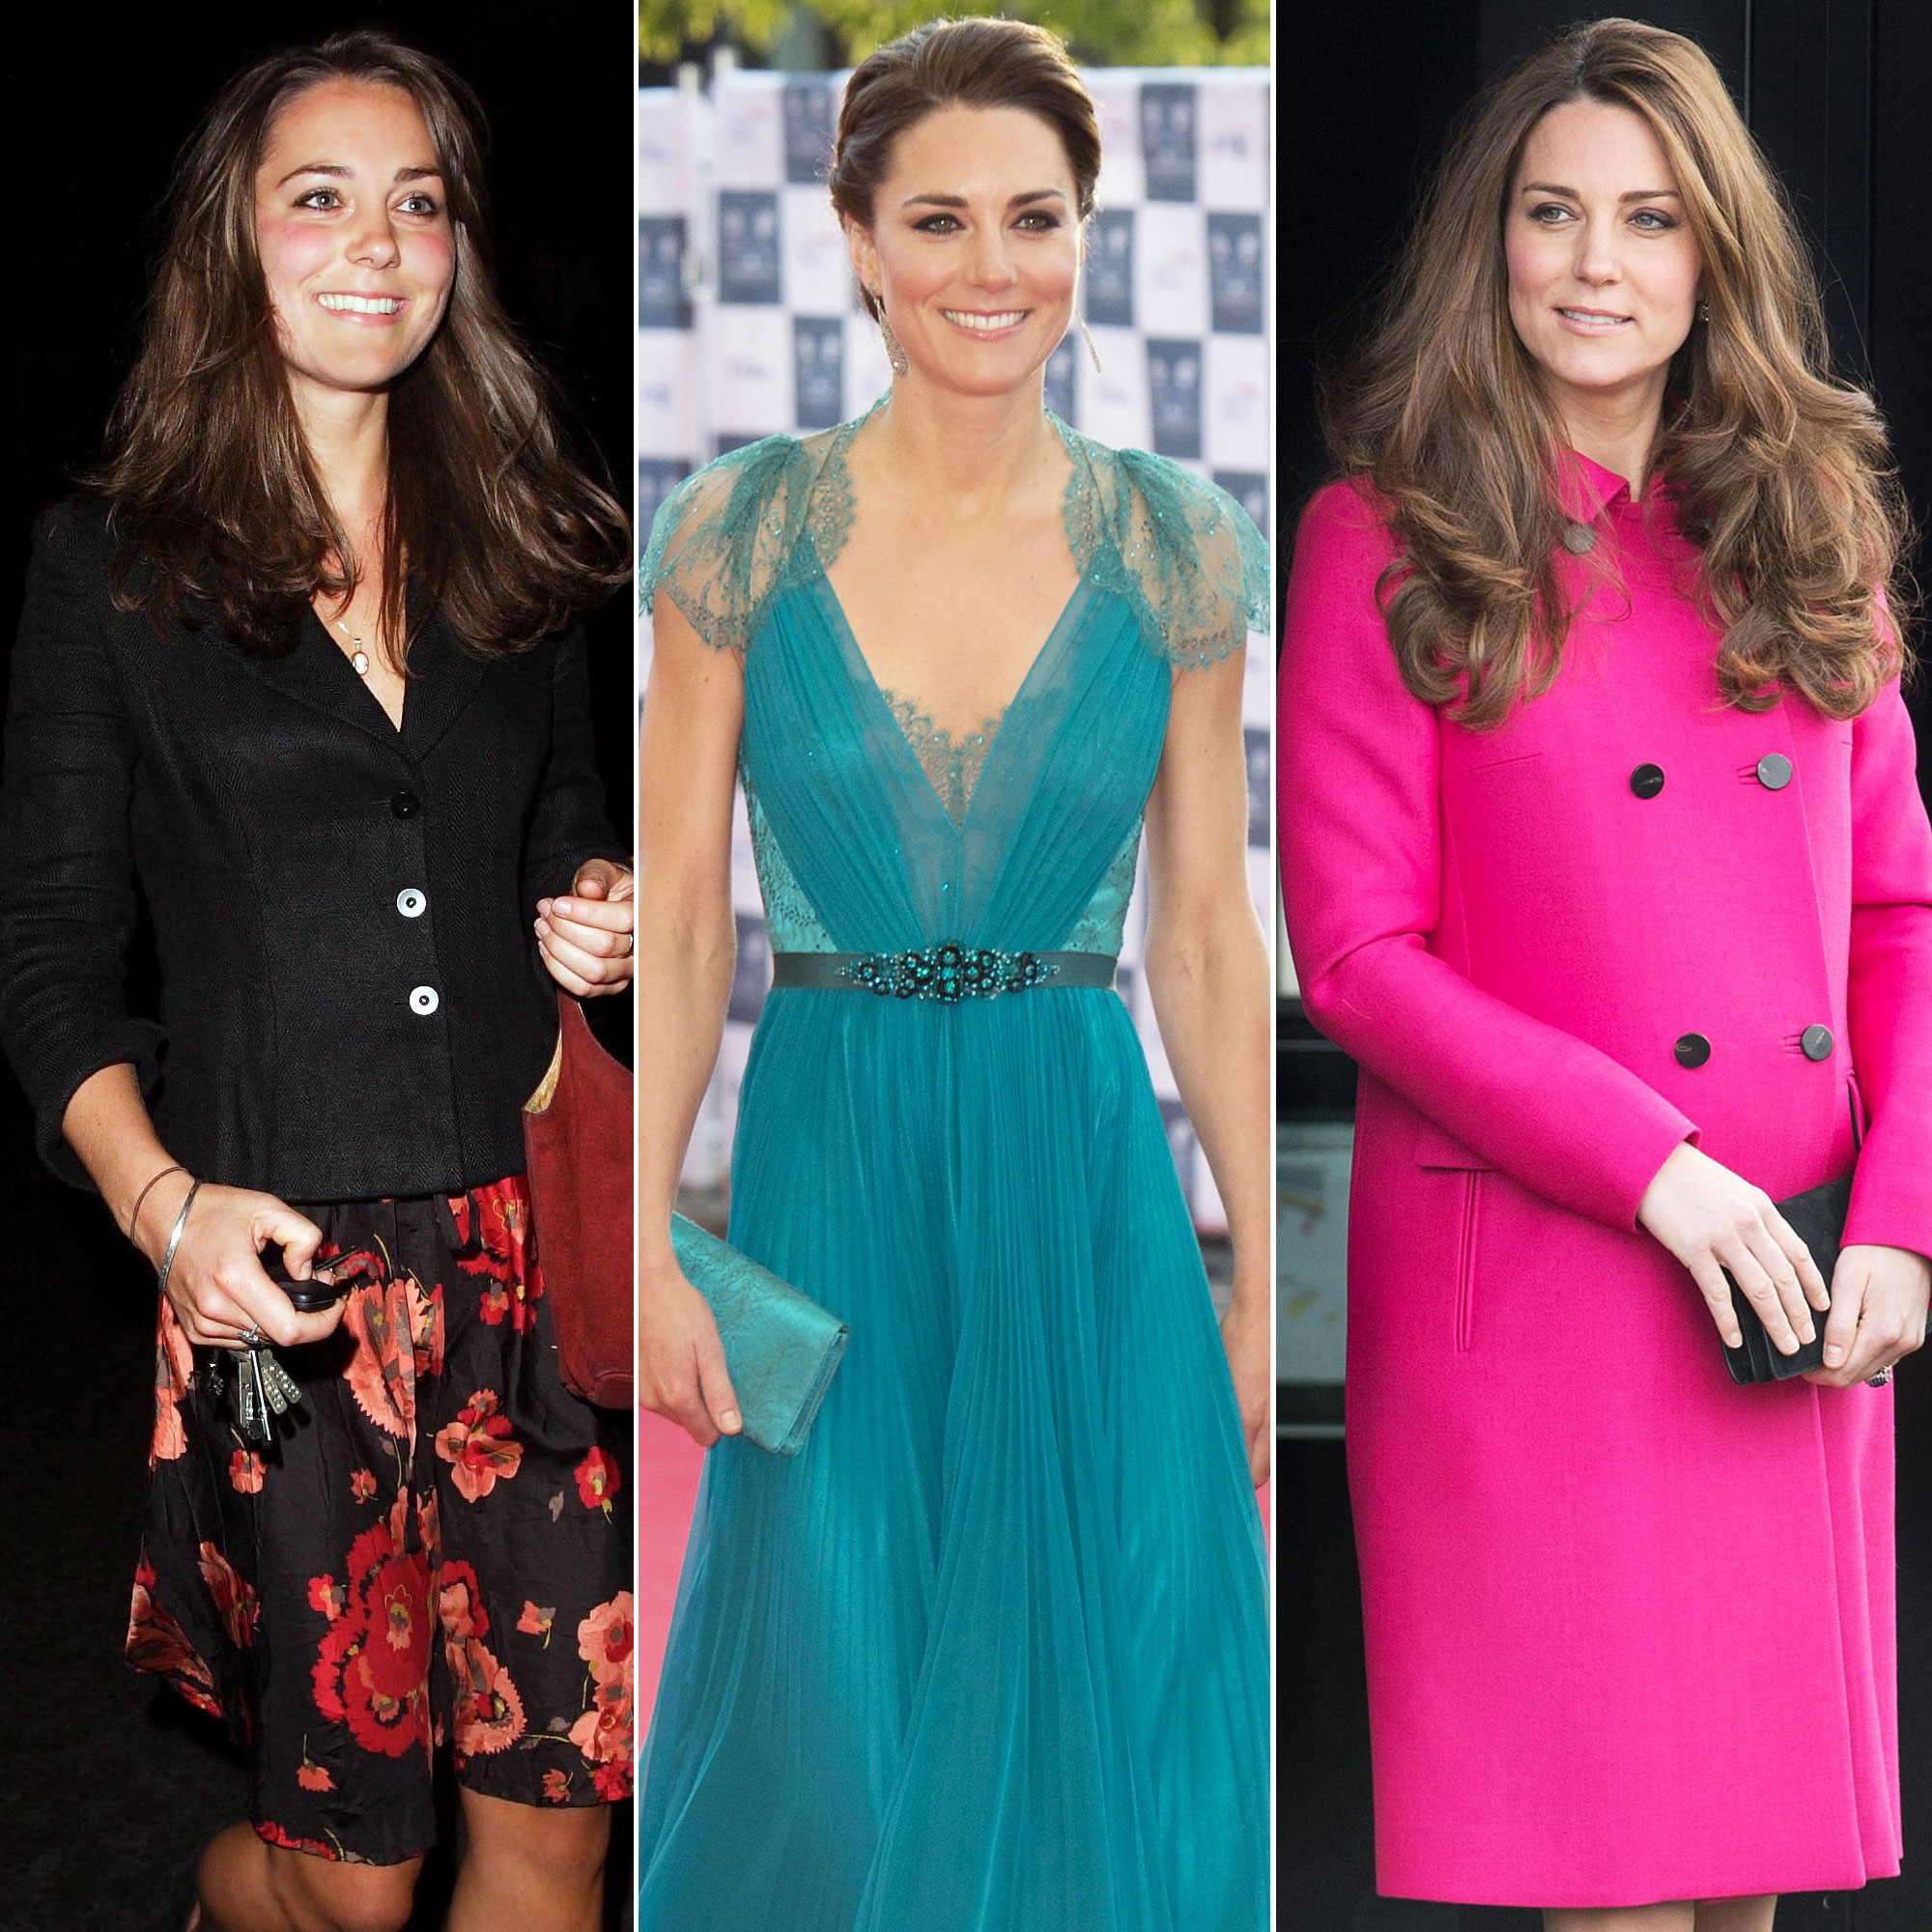 Kate Middleton's Style Evolution Over the Years